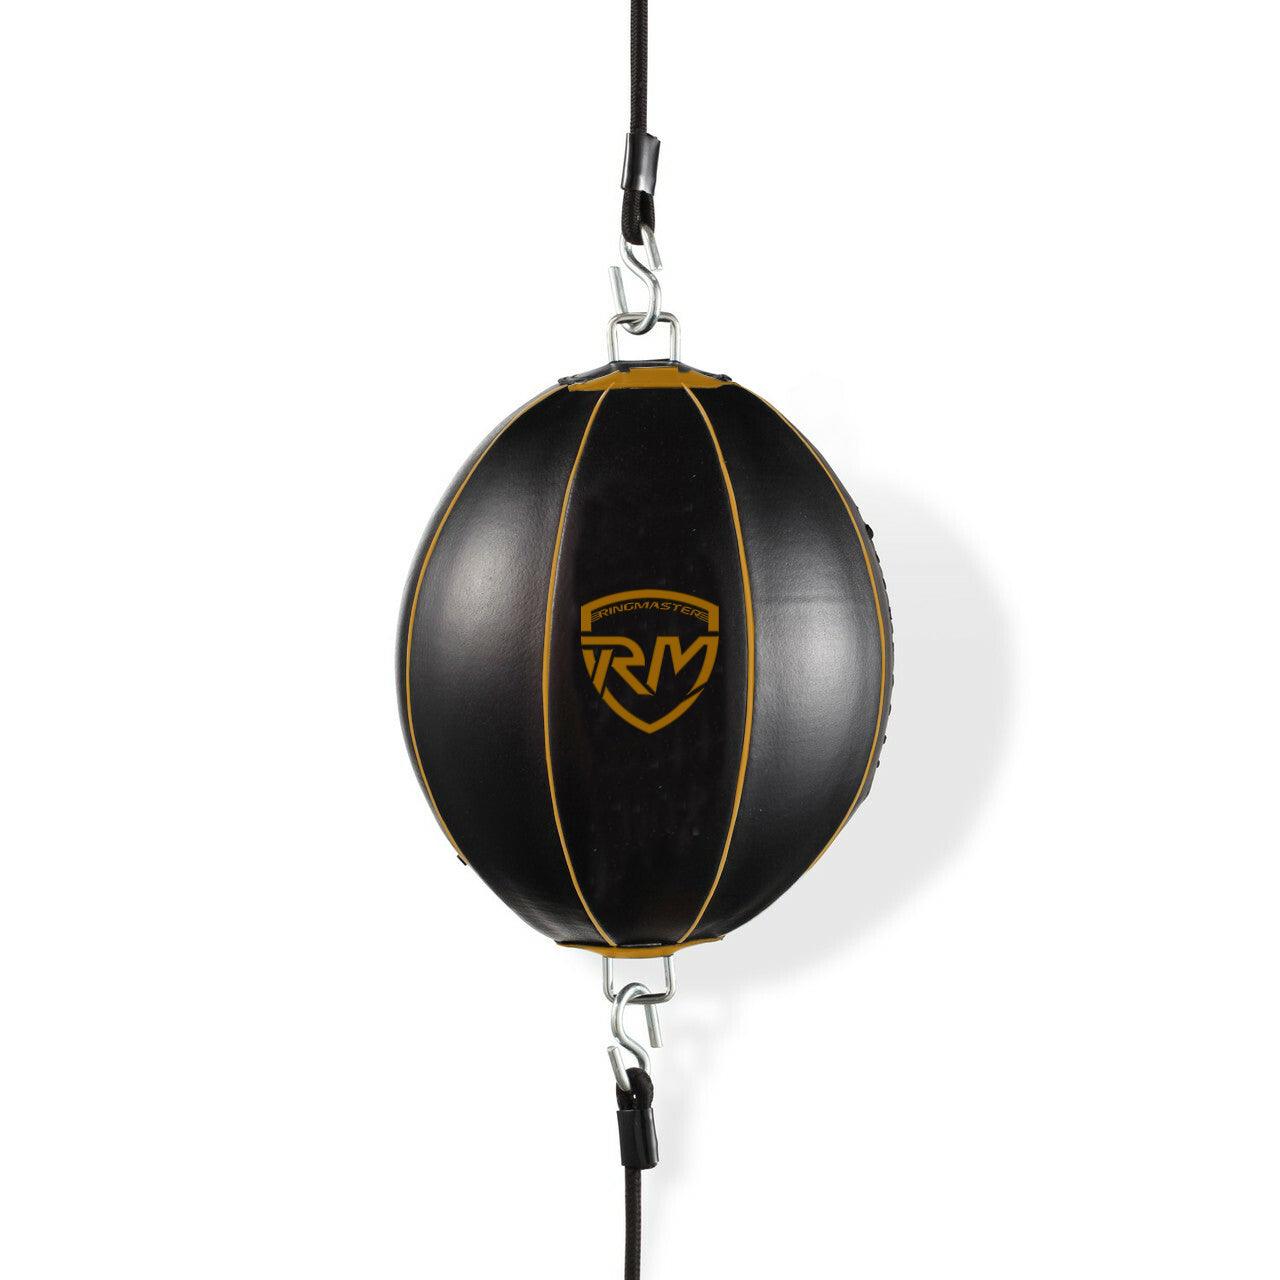 RingMaster Sports Double End Round Speed Ball BoxR Series Genuine Leather Gold/Black - RINGMASTER SPORTS - Made For Champions